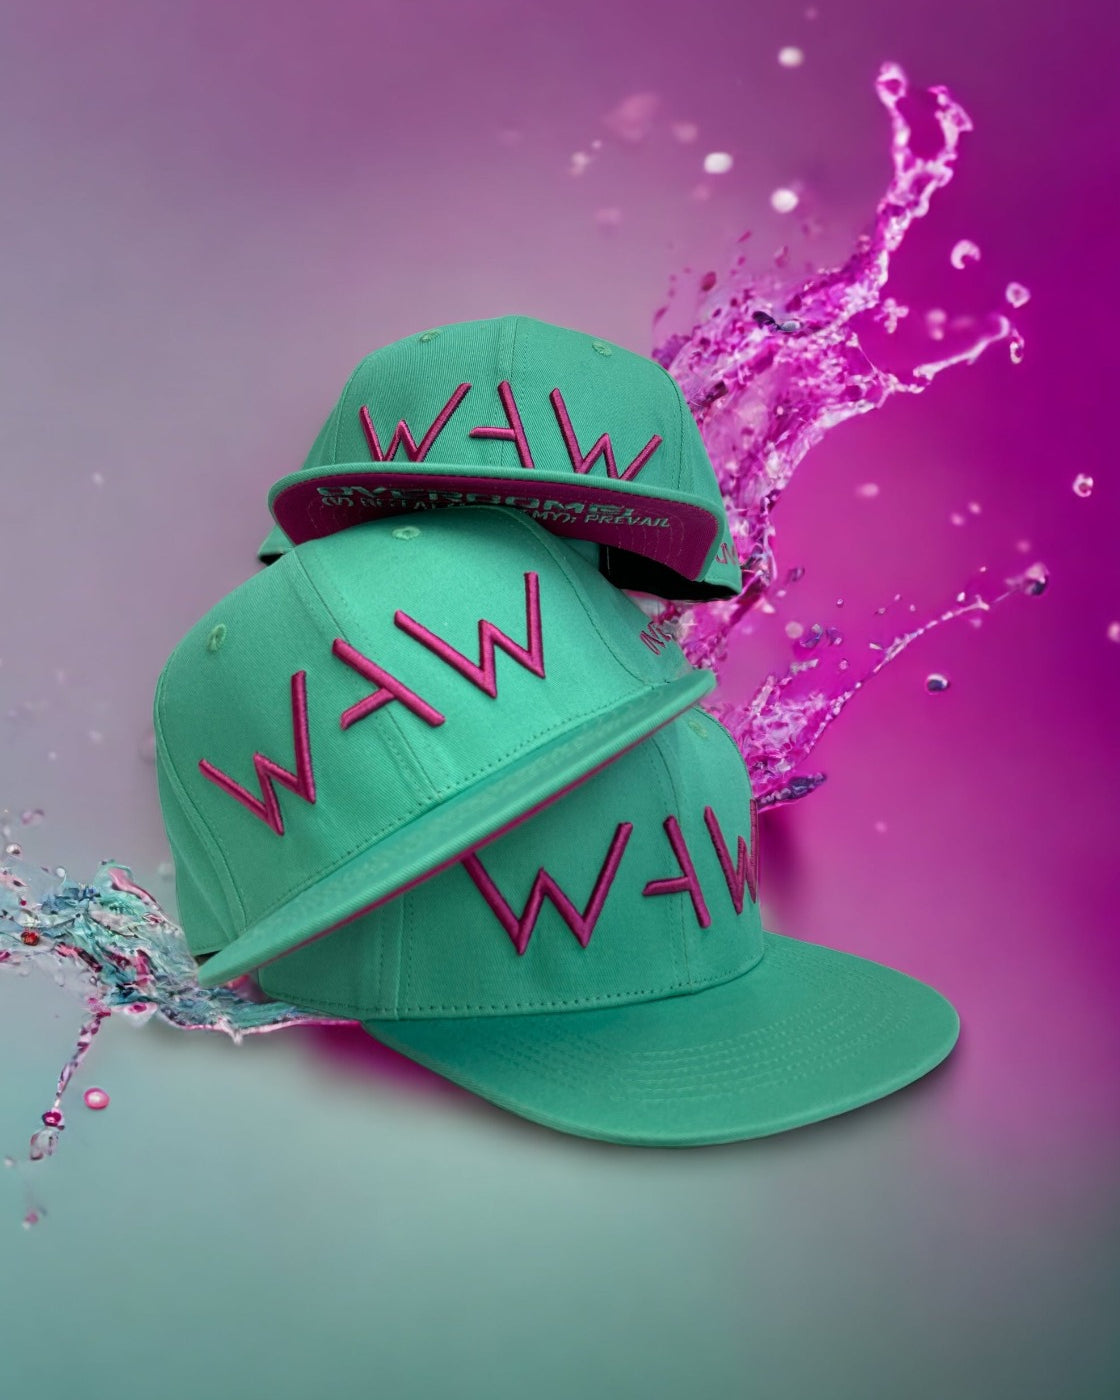 Teal and Hot Pink WAW Hat, with WAW logo and Overcome message, WeAreWarriorsApparel.com